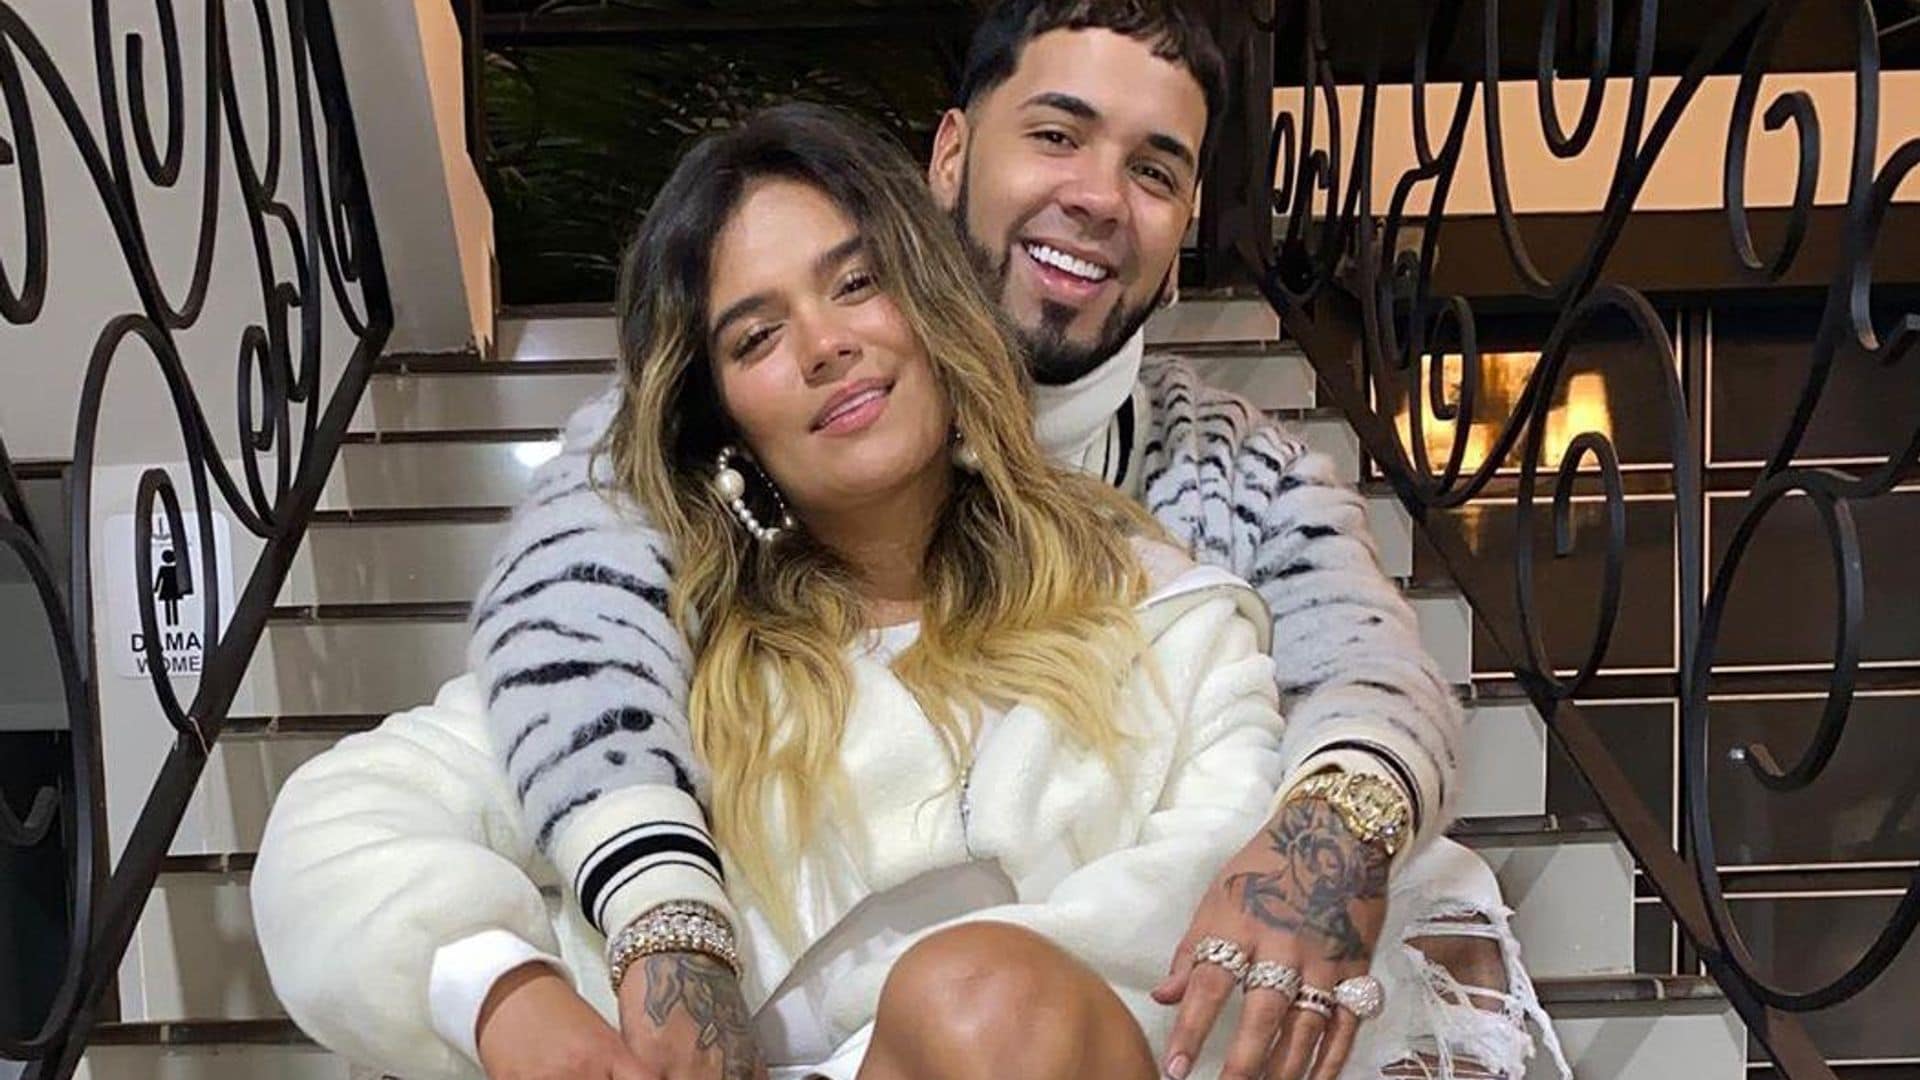 Karol G and Anuel AA romantic picture